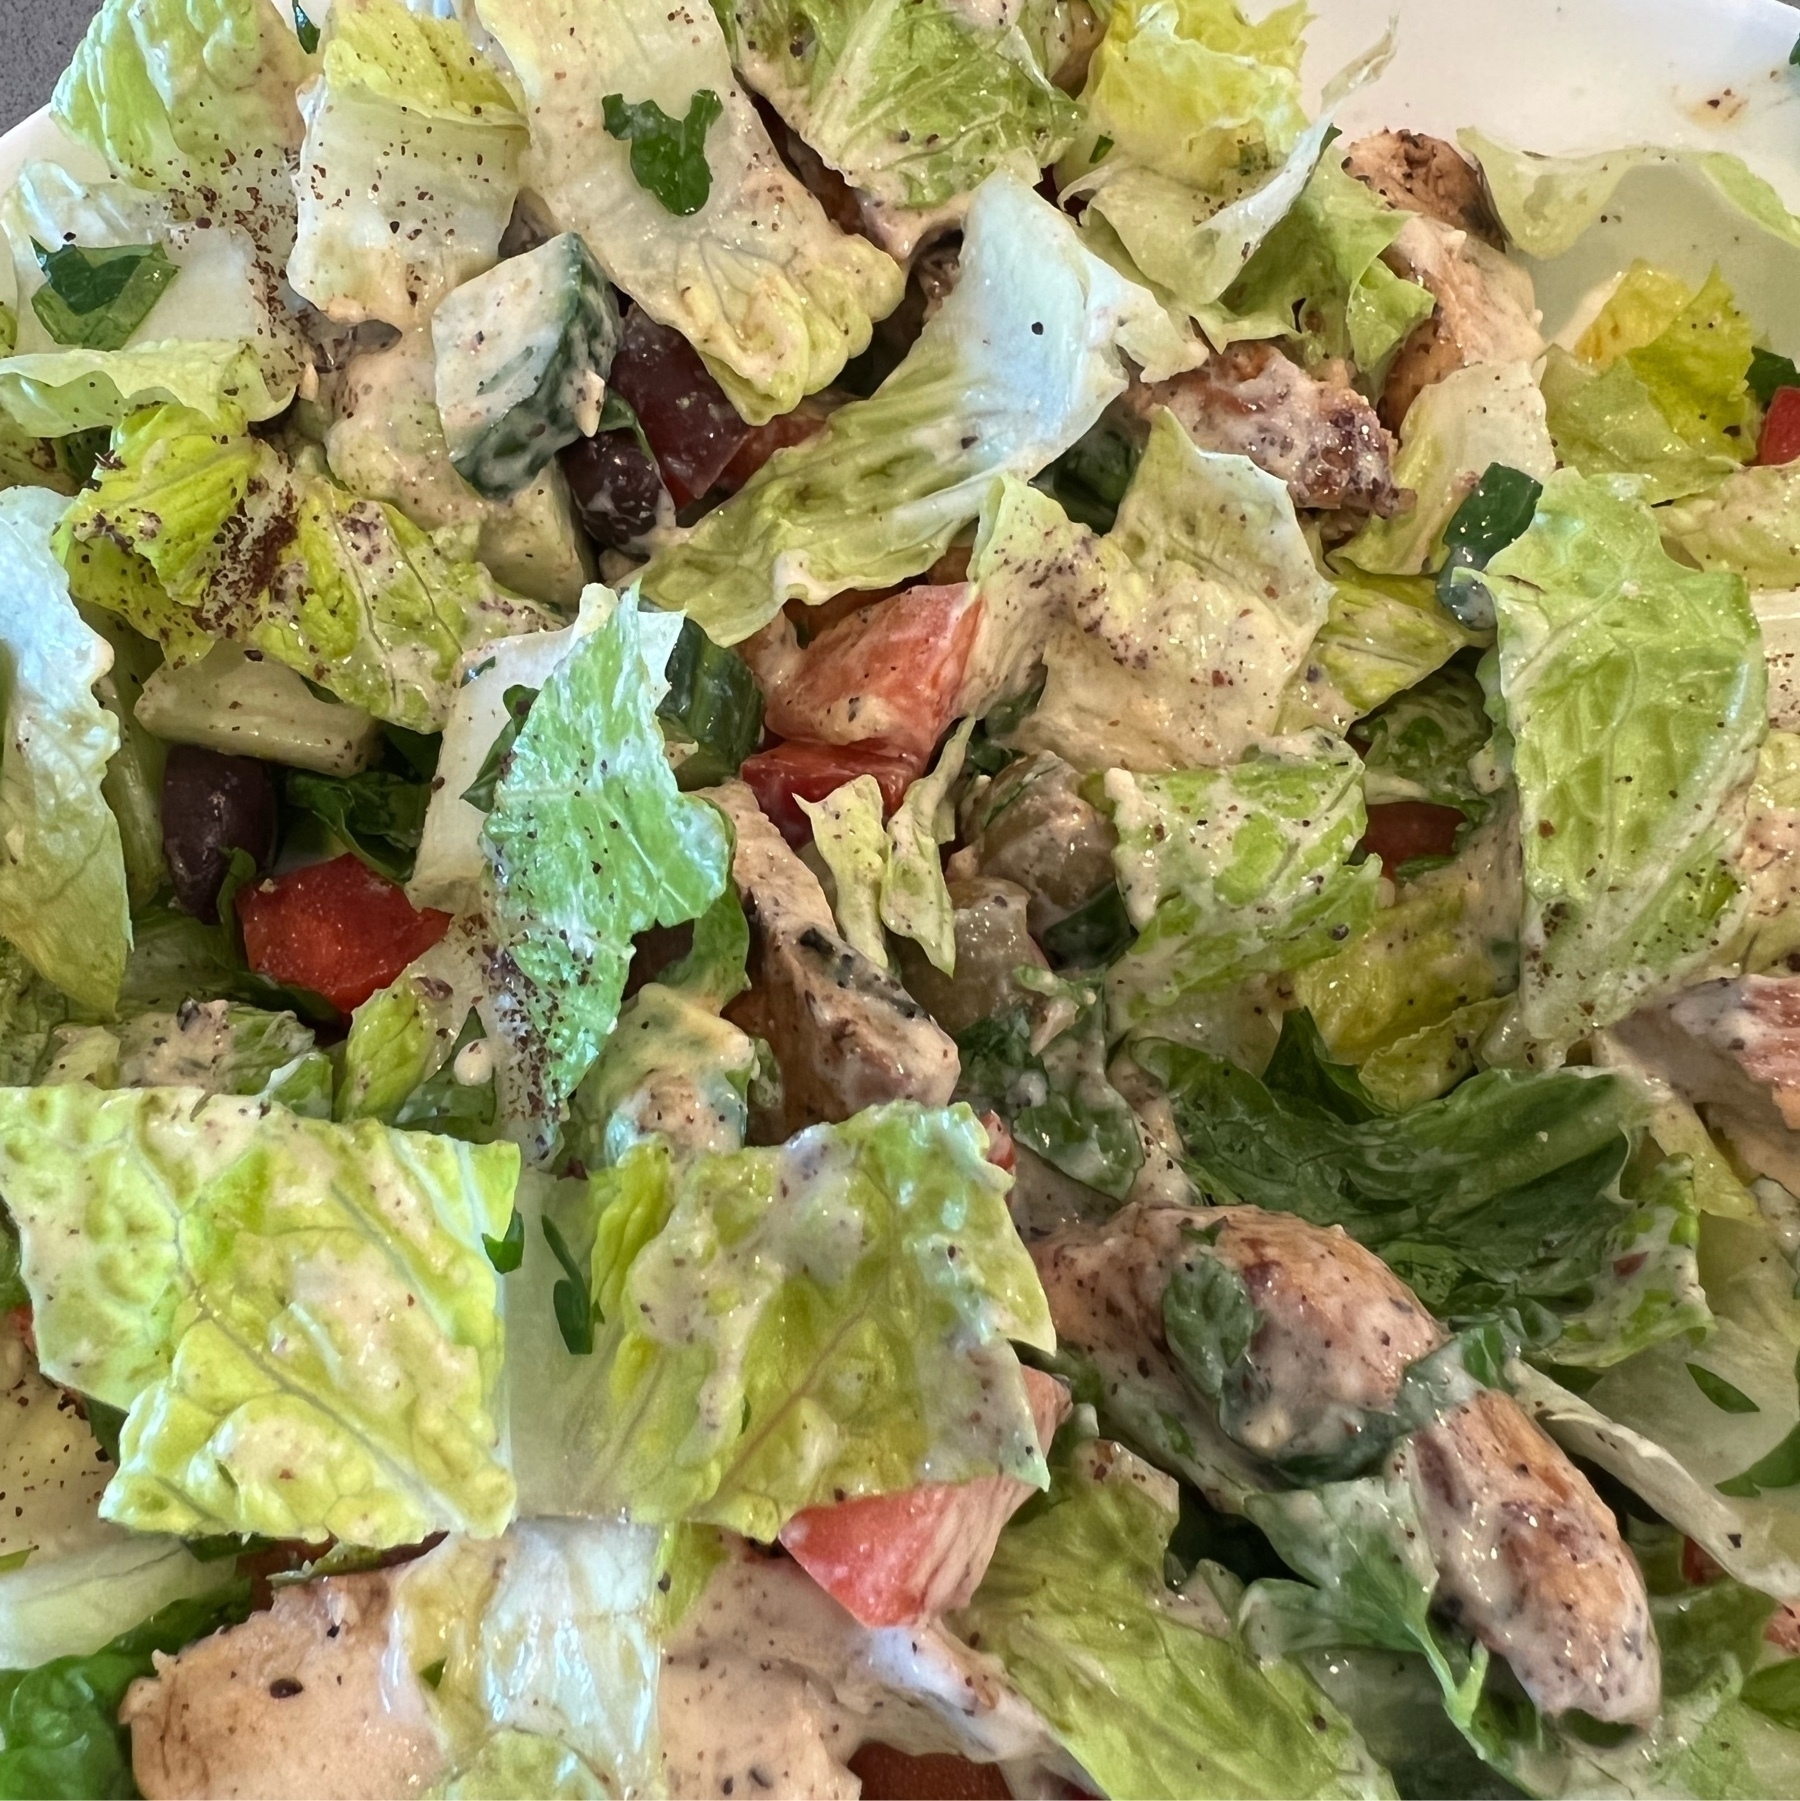 Salad with romaine, red peppers, tomatos, olives, cucumber, grilled chicken, and a speckled, creamy dressing.